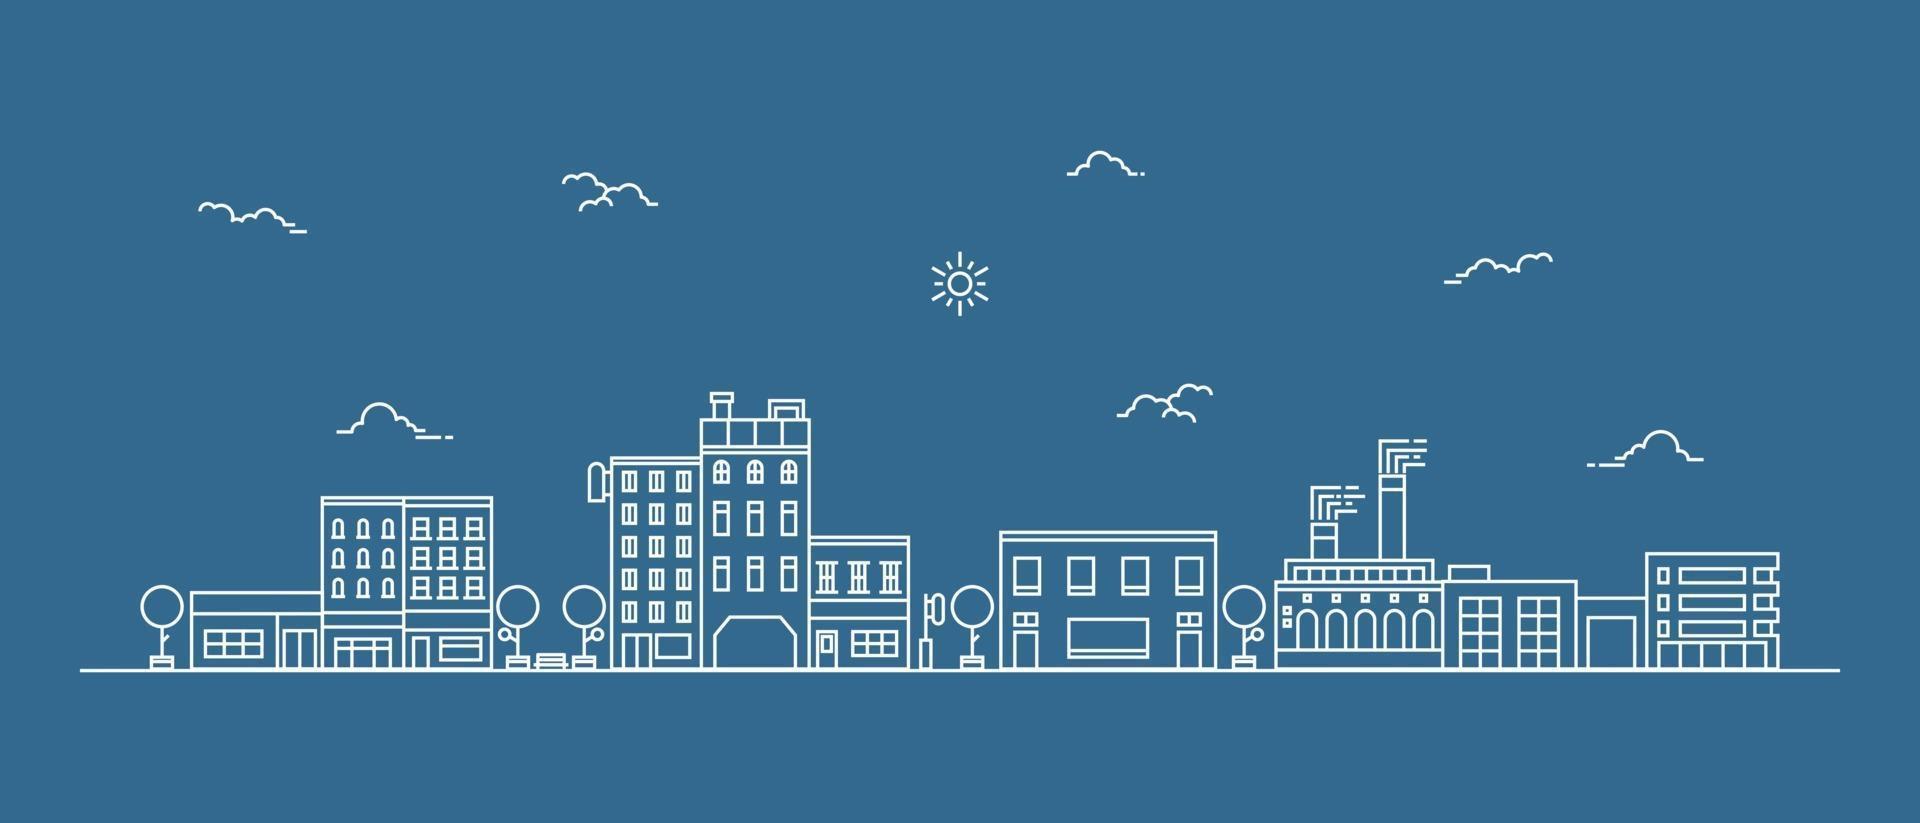 Urban landscape with a thin line style. Cityscape flat line design. Vector illustration.